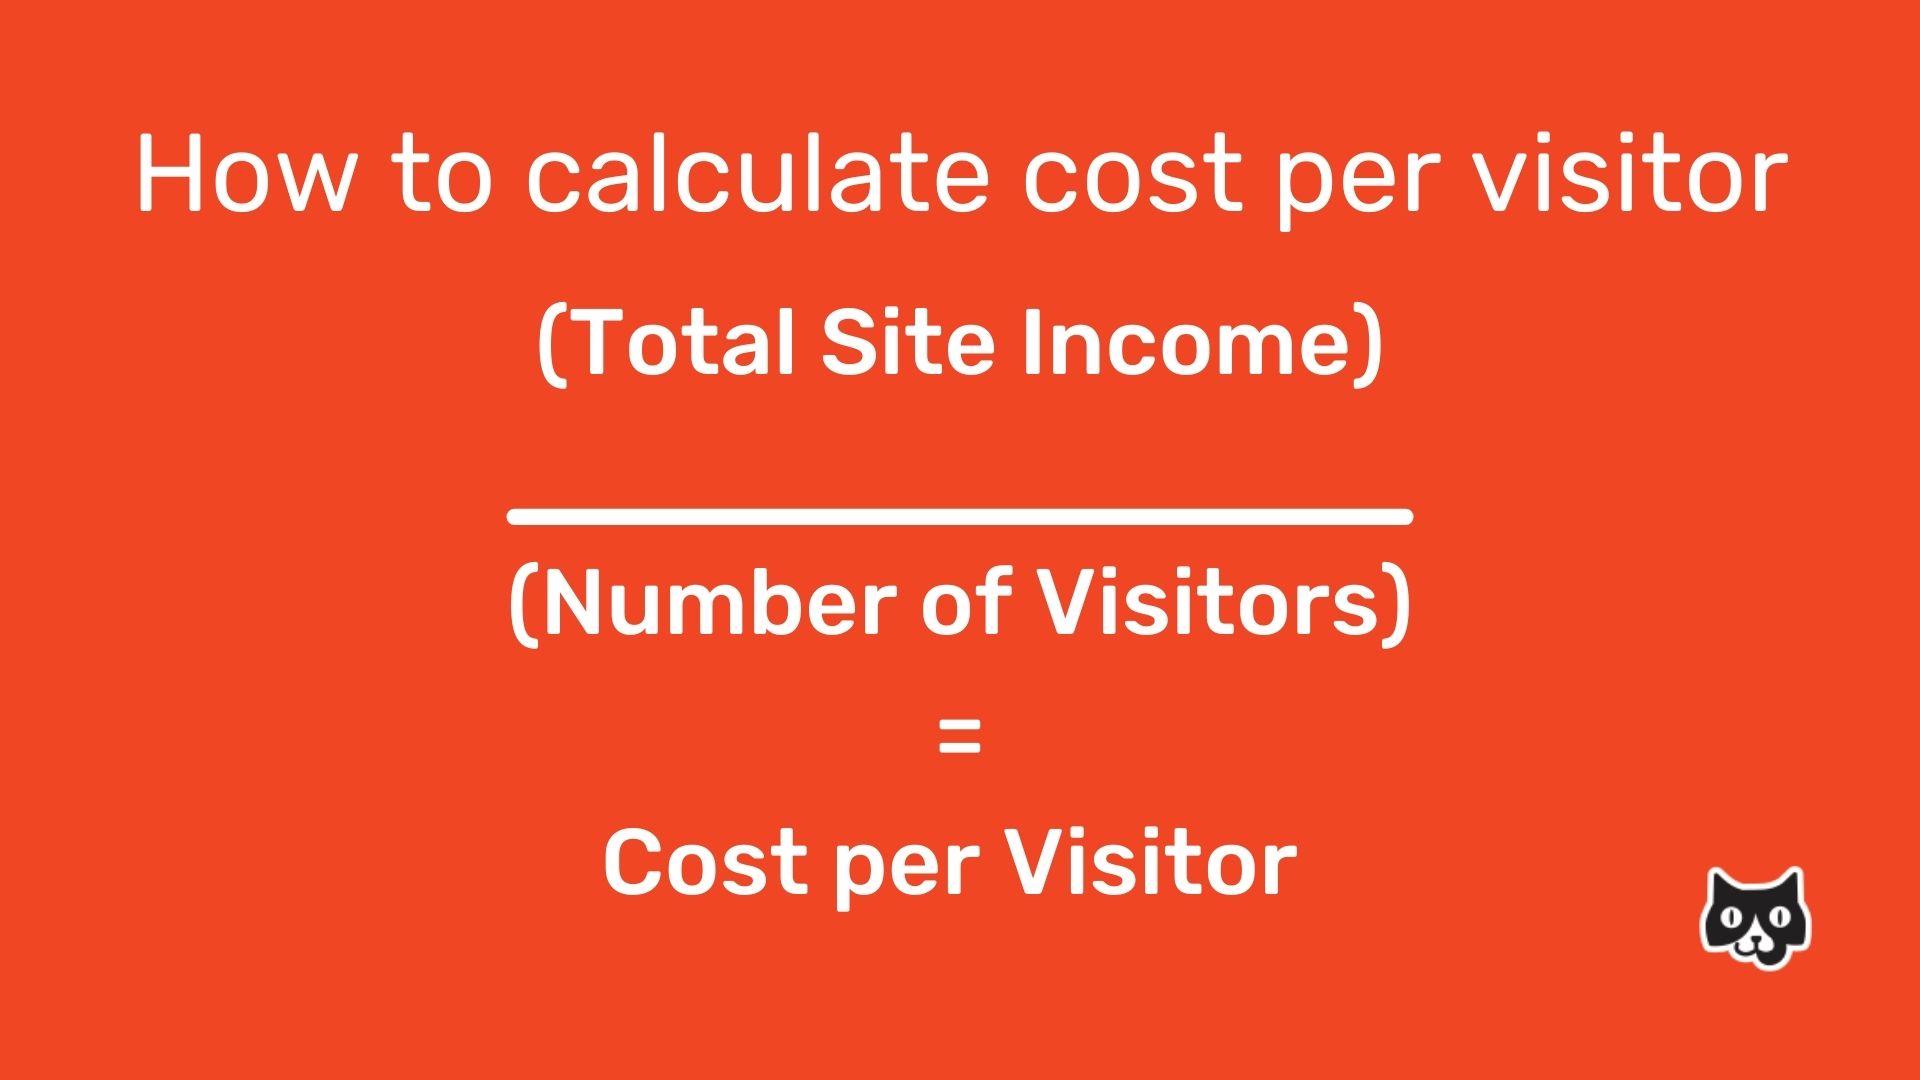 This image shows the formula for how to calculate the cost per visitor, a content marketing metric